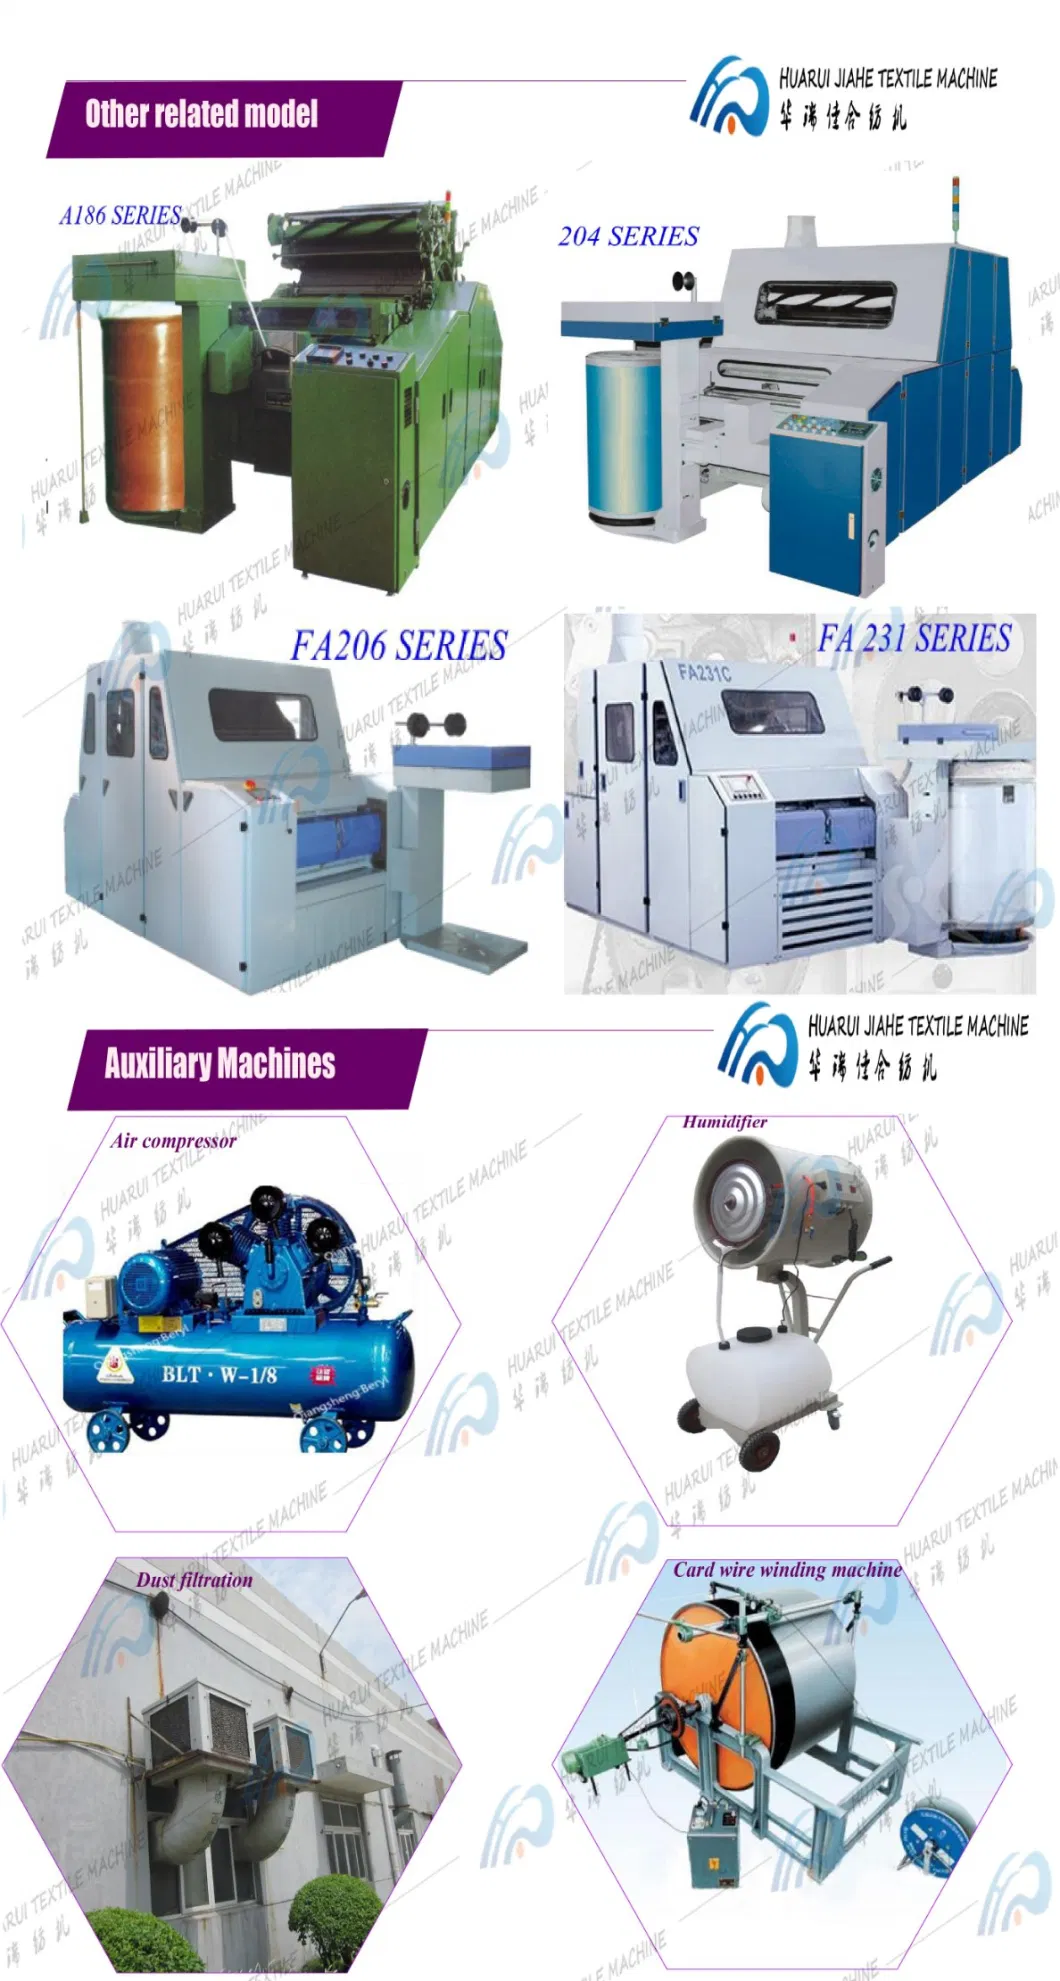 Roll Dyeing Machine Price Discount Mainly Used for The Dyeing of Cotton, Acrylic, Polyester/Cotton, Polyester, Silk, Spandex and Other Fabrics